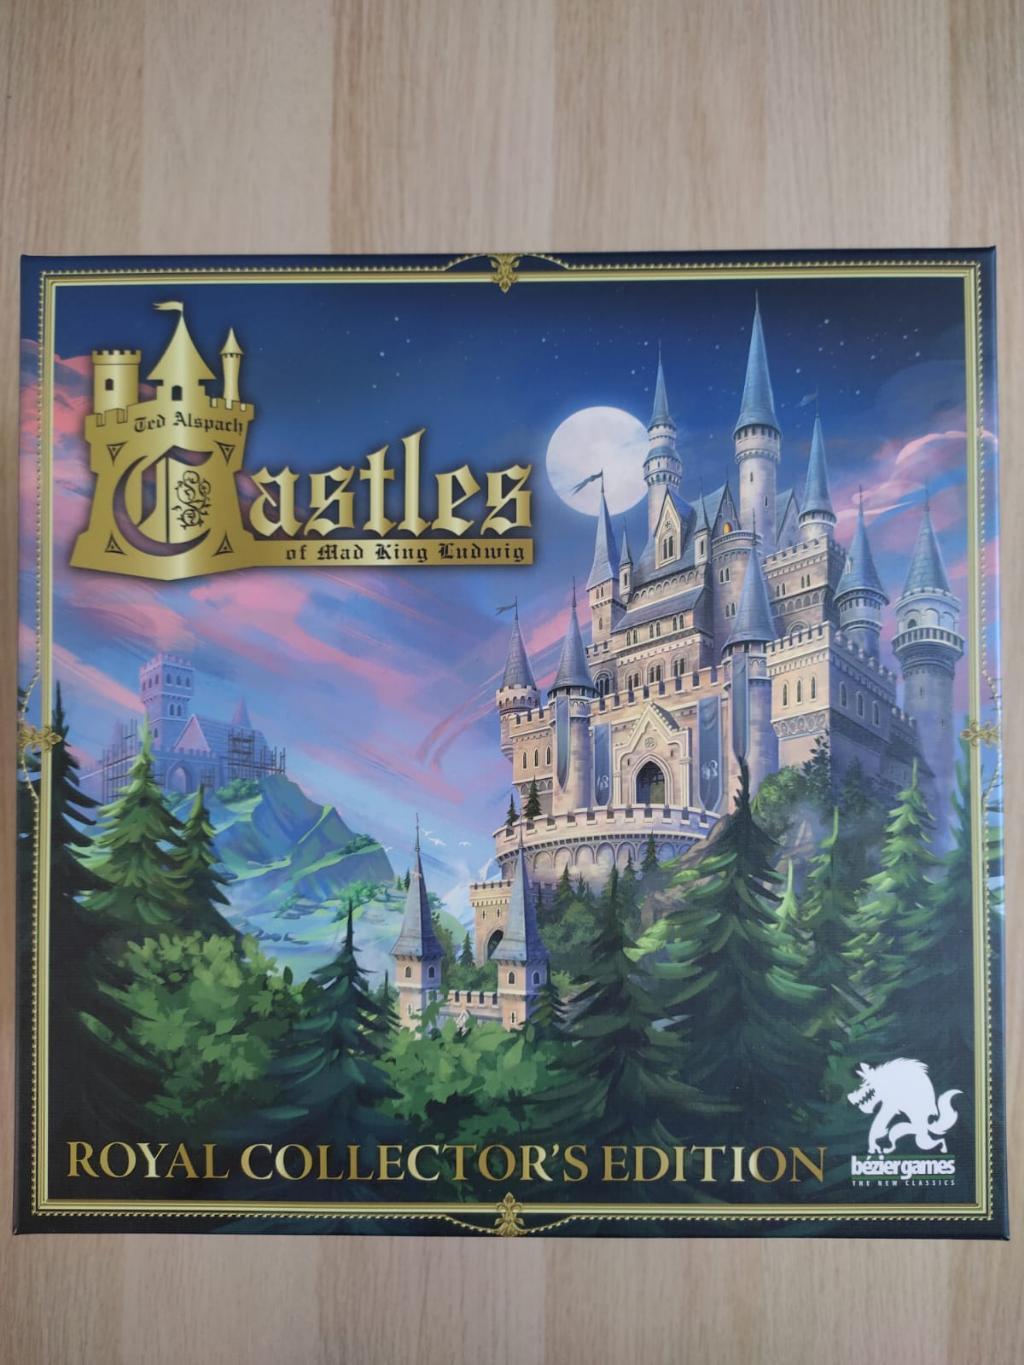 Castels Of Mad King Ludwig Royal Collector's Edition